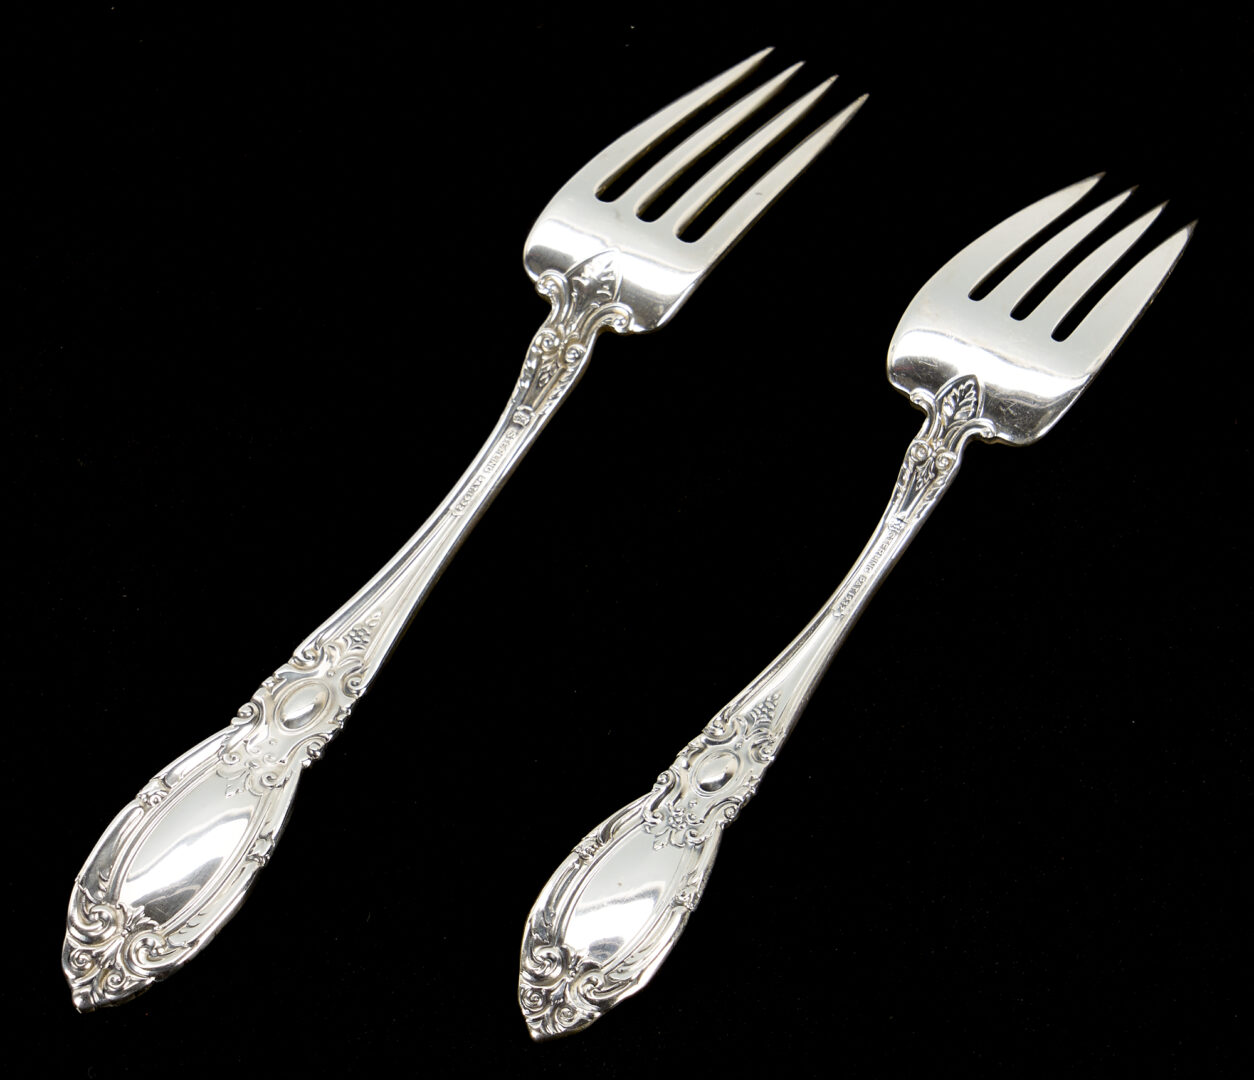 Lot 59: 107 pcs. Towle King Richard Sterling Flatware, Service for 12